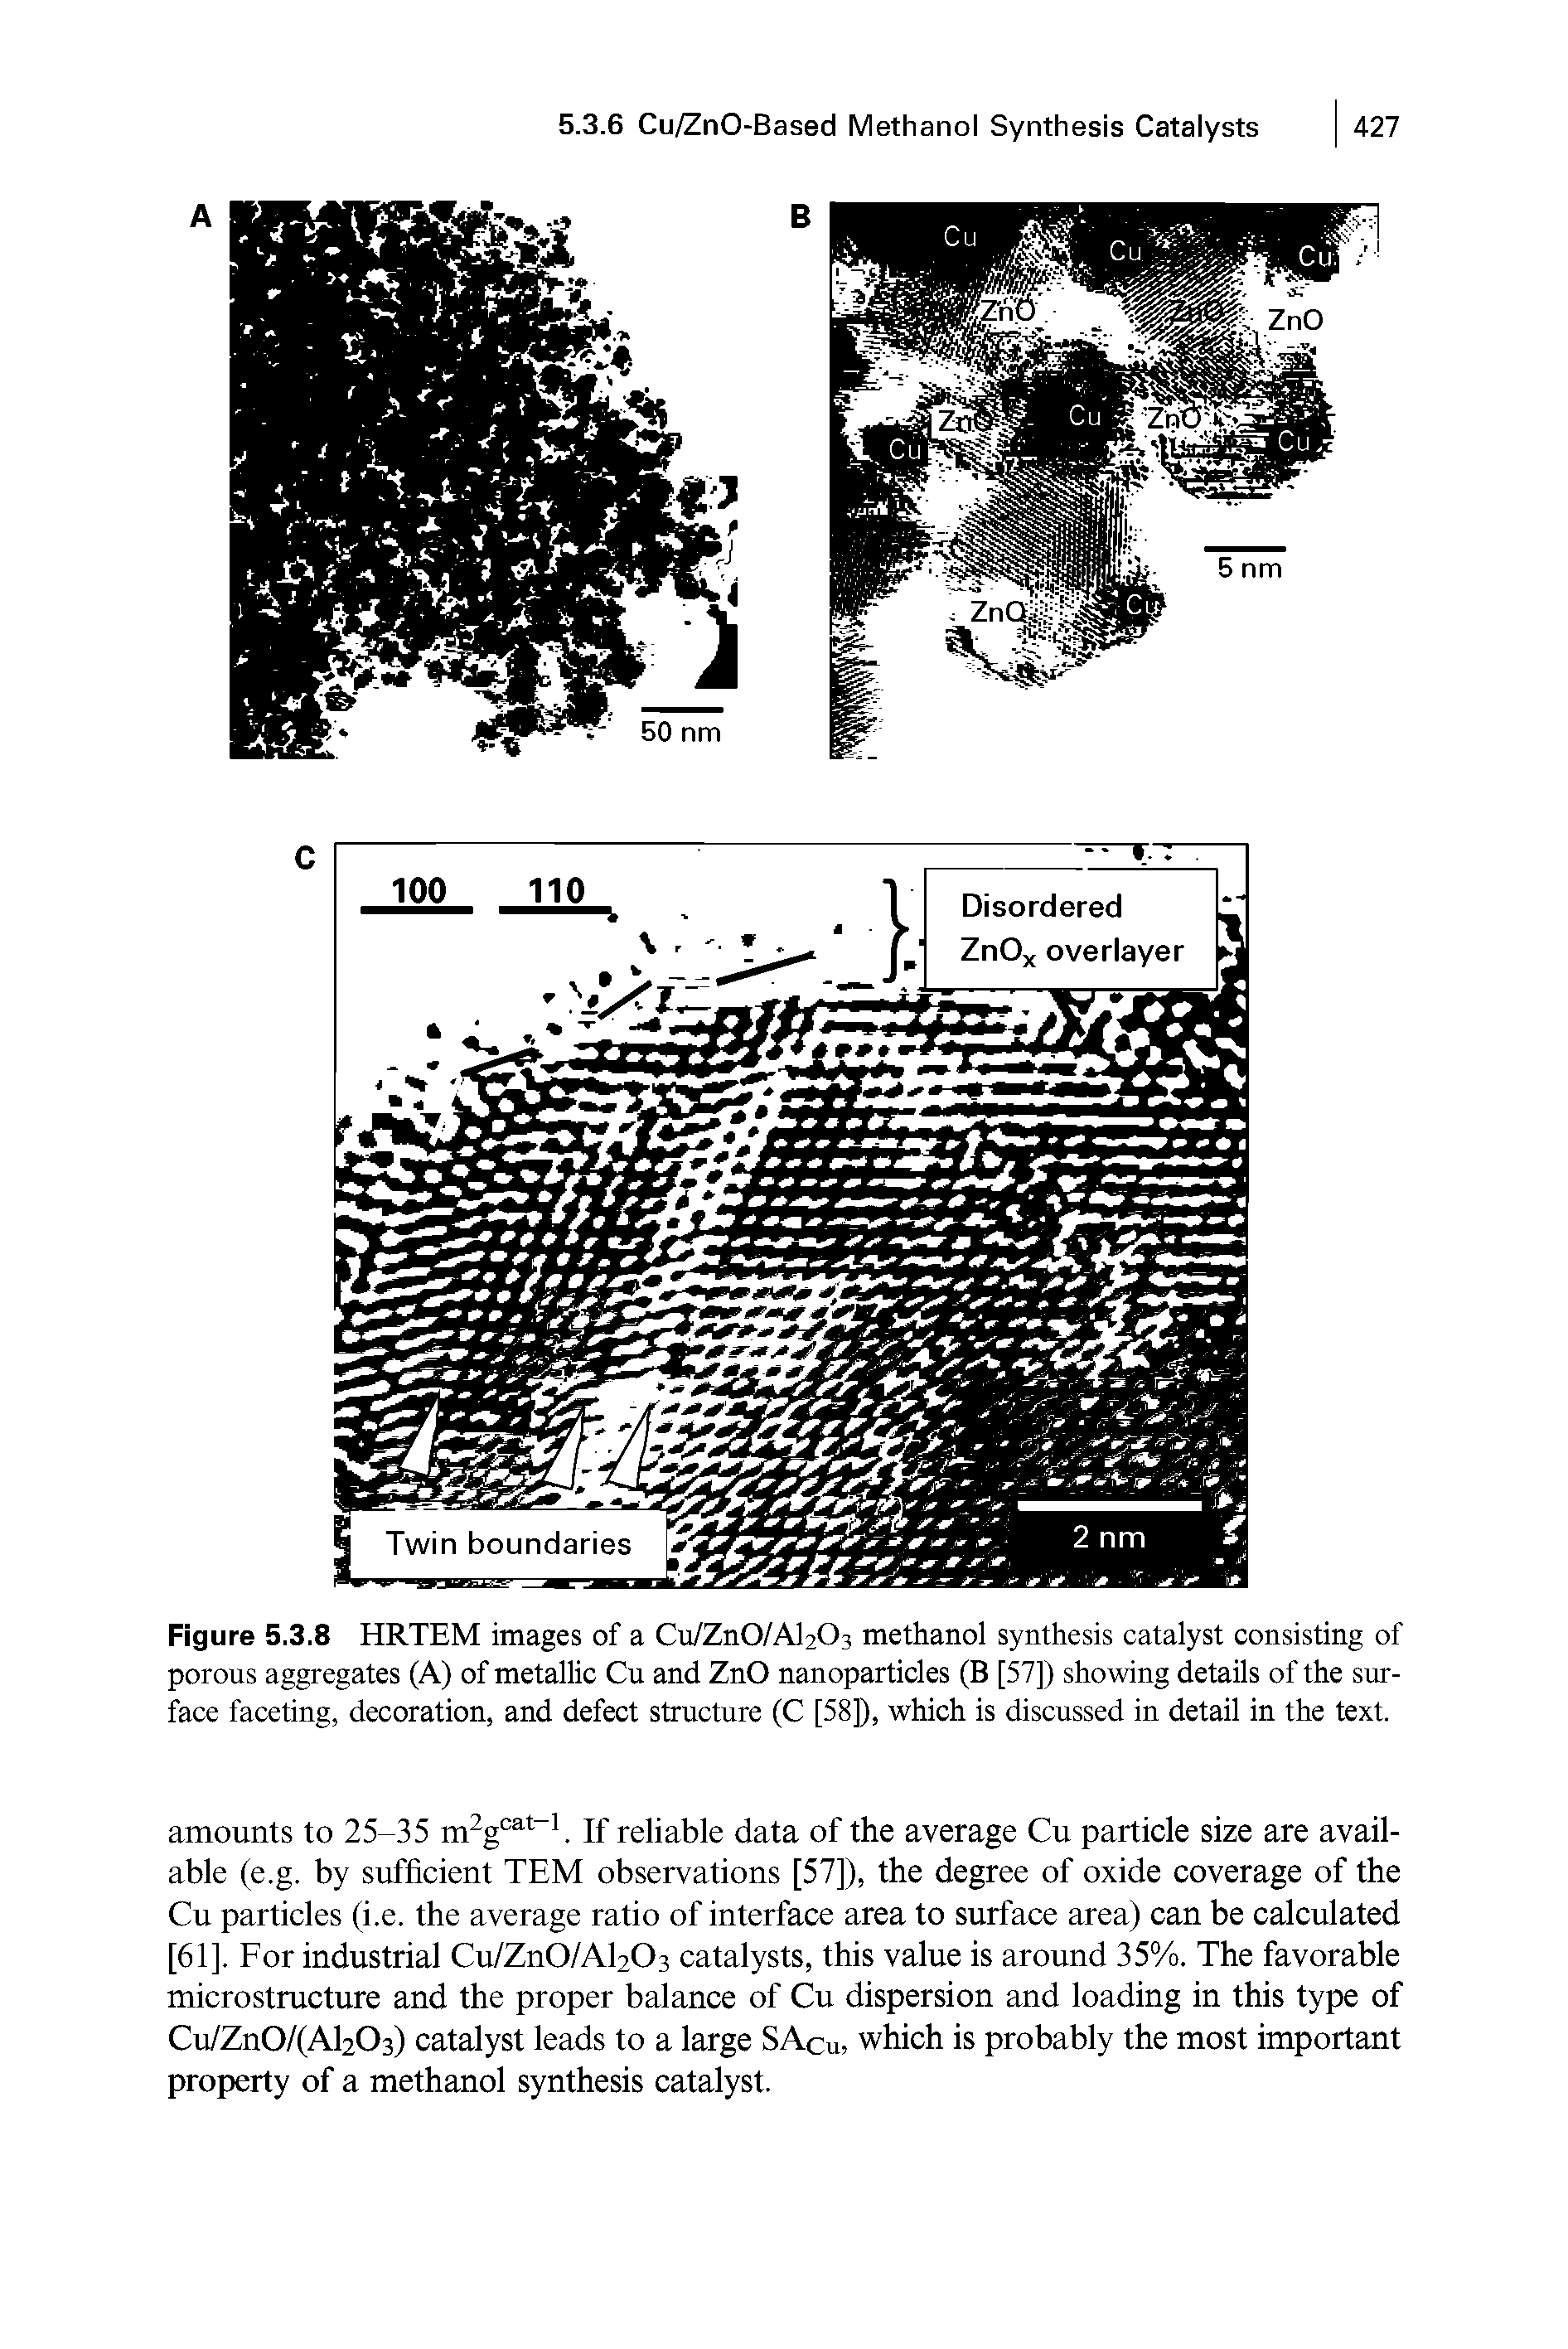 Figure 5.3.8 HRTEM images of a C11/Z11O/AI2O3 methanol synthesis catalyst consisting of porous aggregates (A) of metallic Cu and ZnO nanoparticles (B [57]) showing details of the surface faceting, decoration, and defect structure (C [58]), which is discussed in detail in the text.